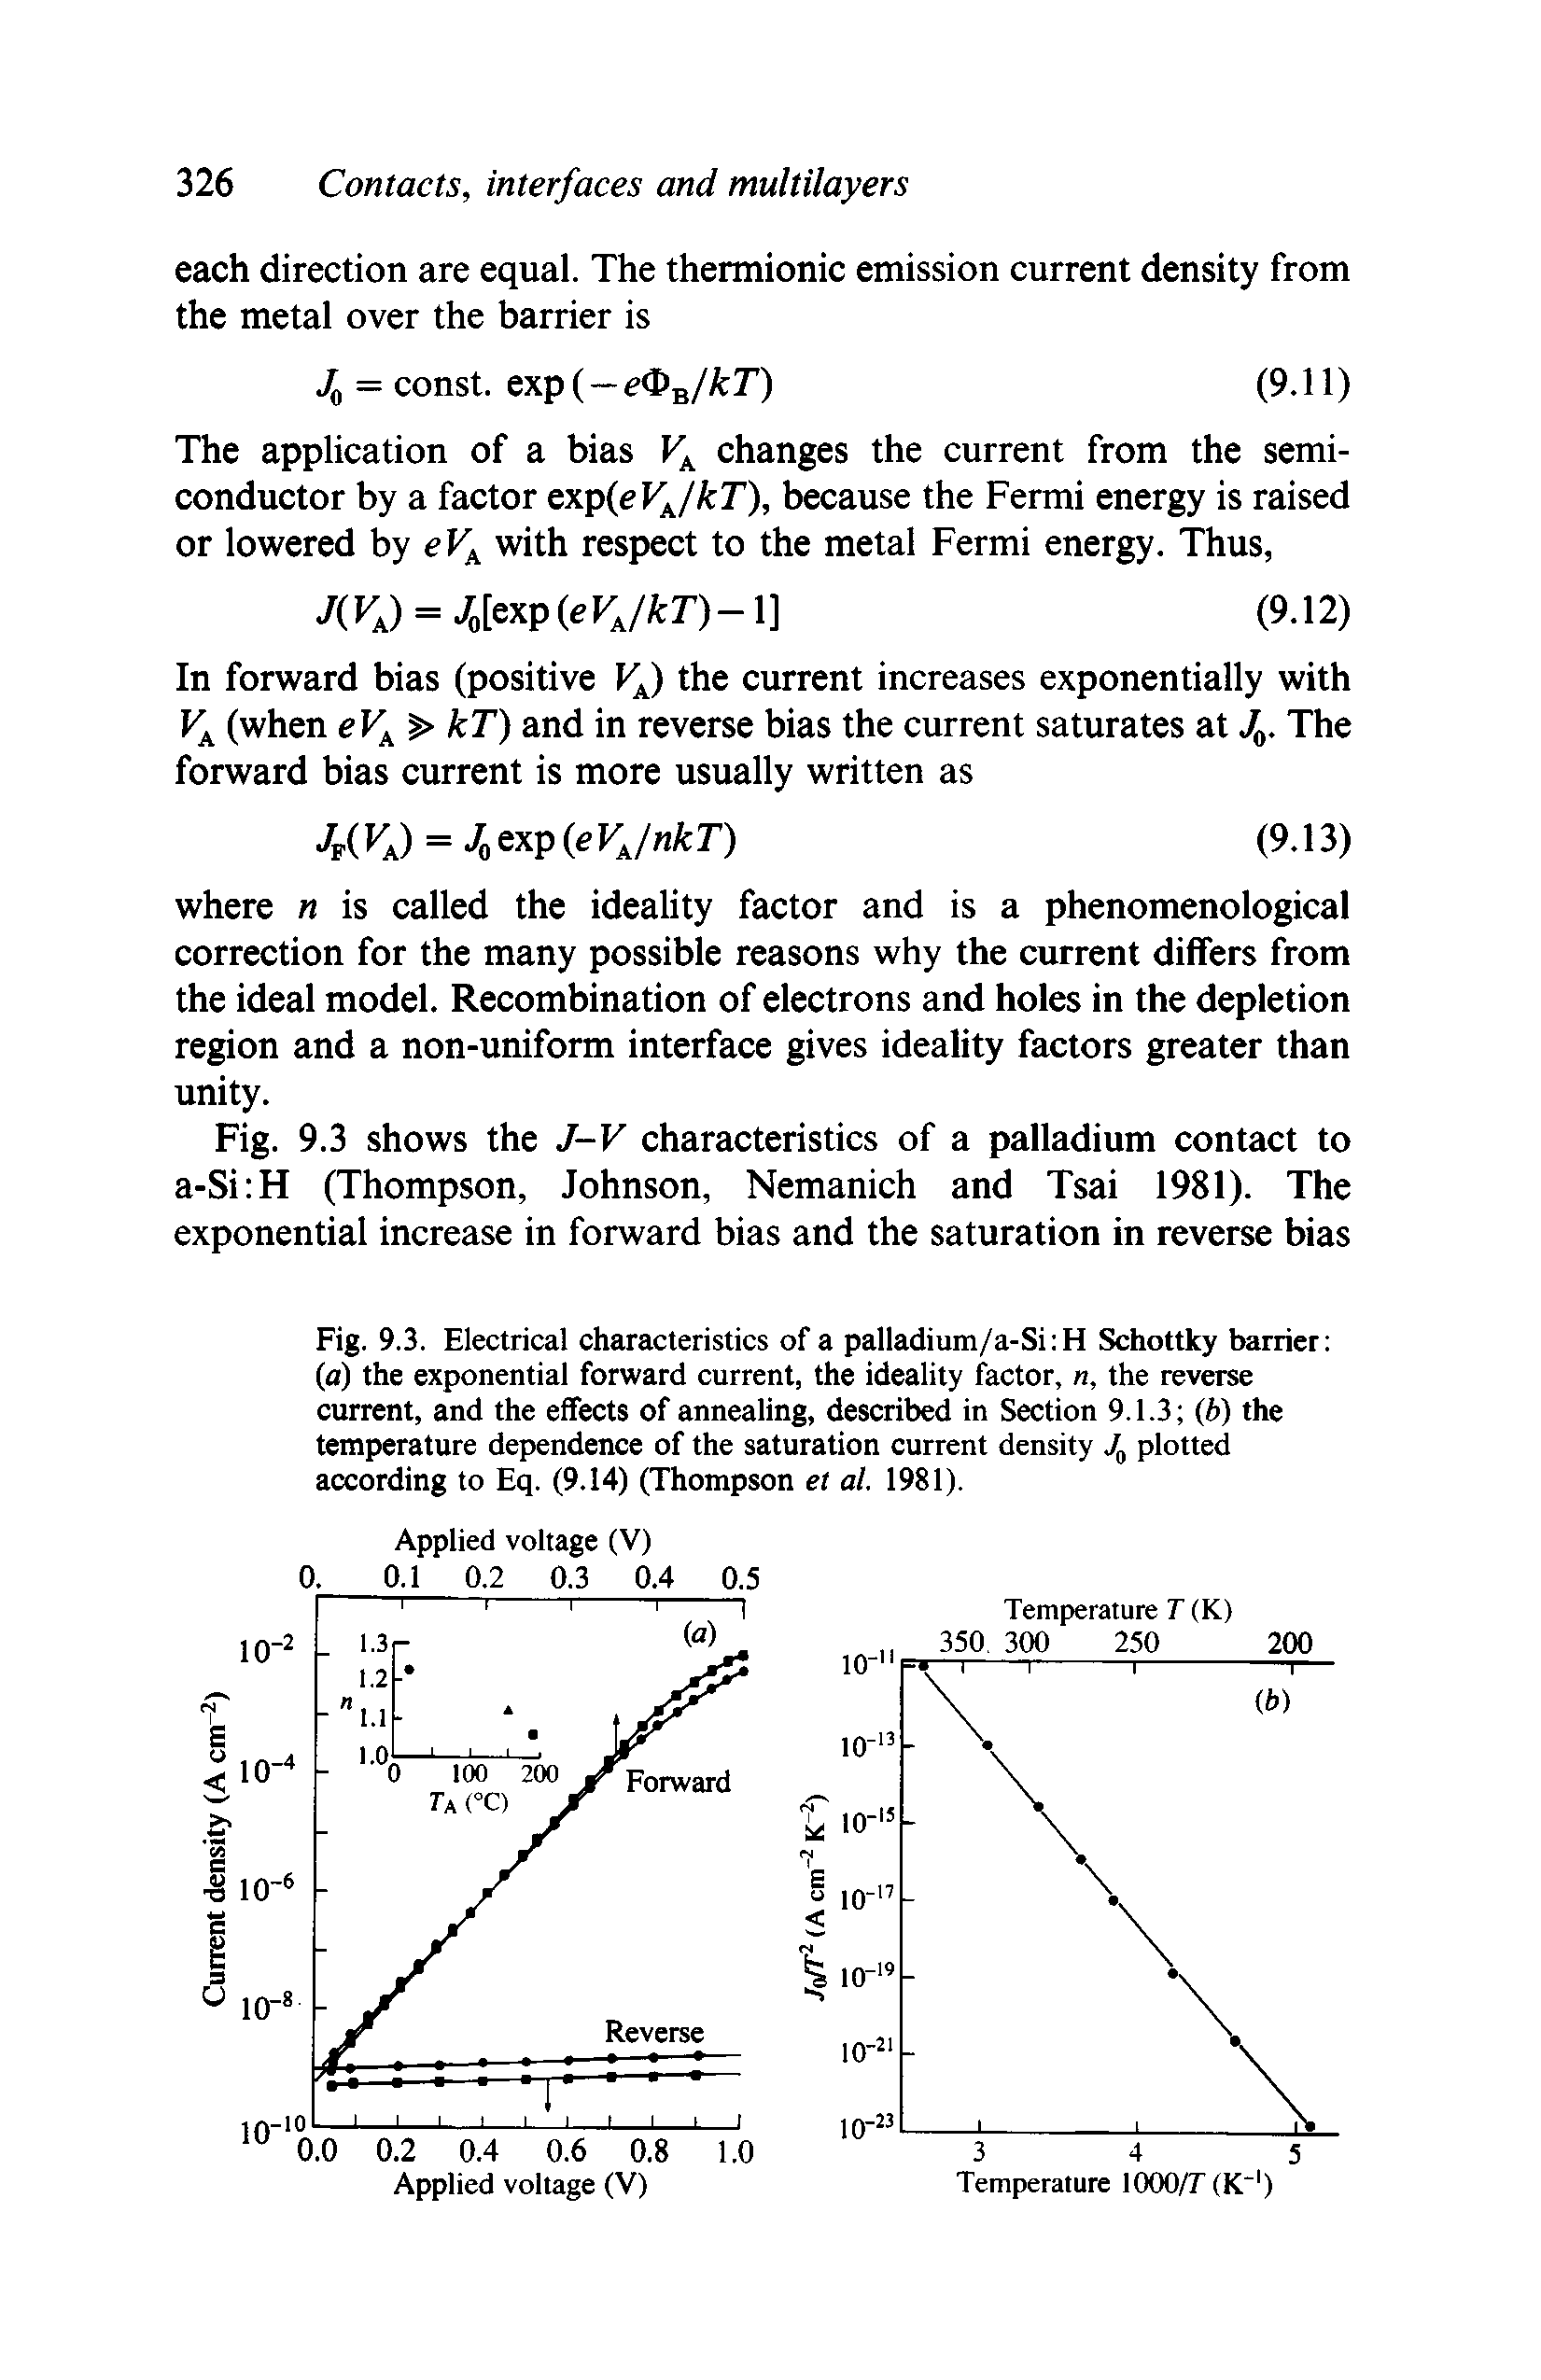 Fig. 9.3. Electrical characteristics of a palladium/a-Si H Schottky barrier (a) the exponential forward current, the ideality factor, n, the reverse current, and the effects of annealing, described in Section 9.1.3 (6) the temperature dependence of the saturation current density plotted according to Eq. (9.14) (Thompson et at. 1981).